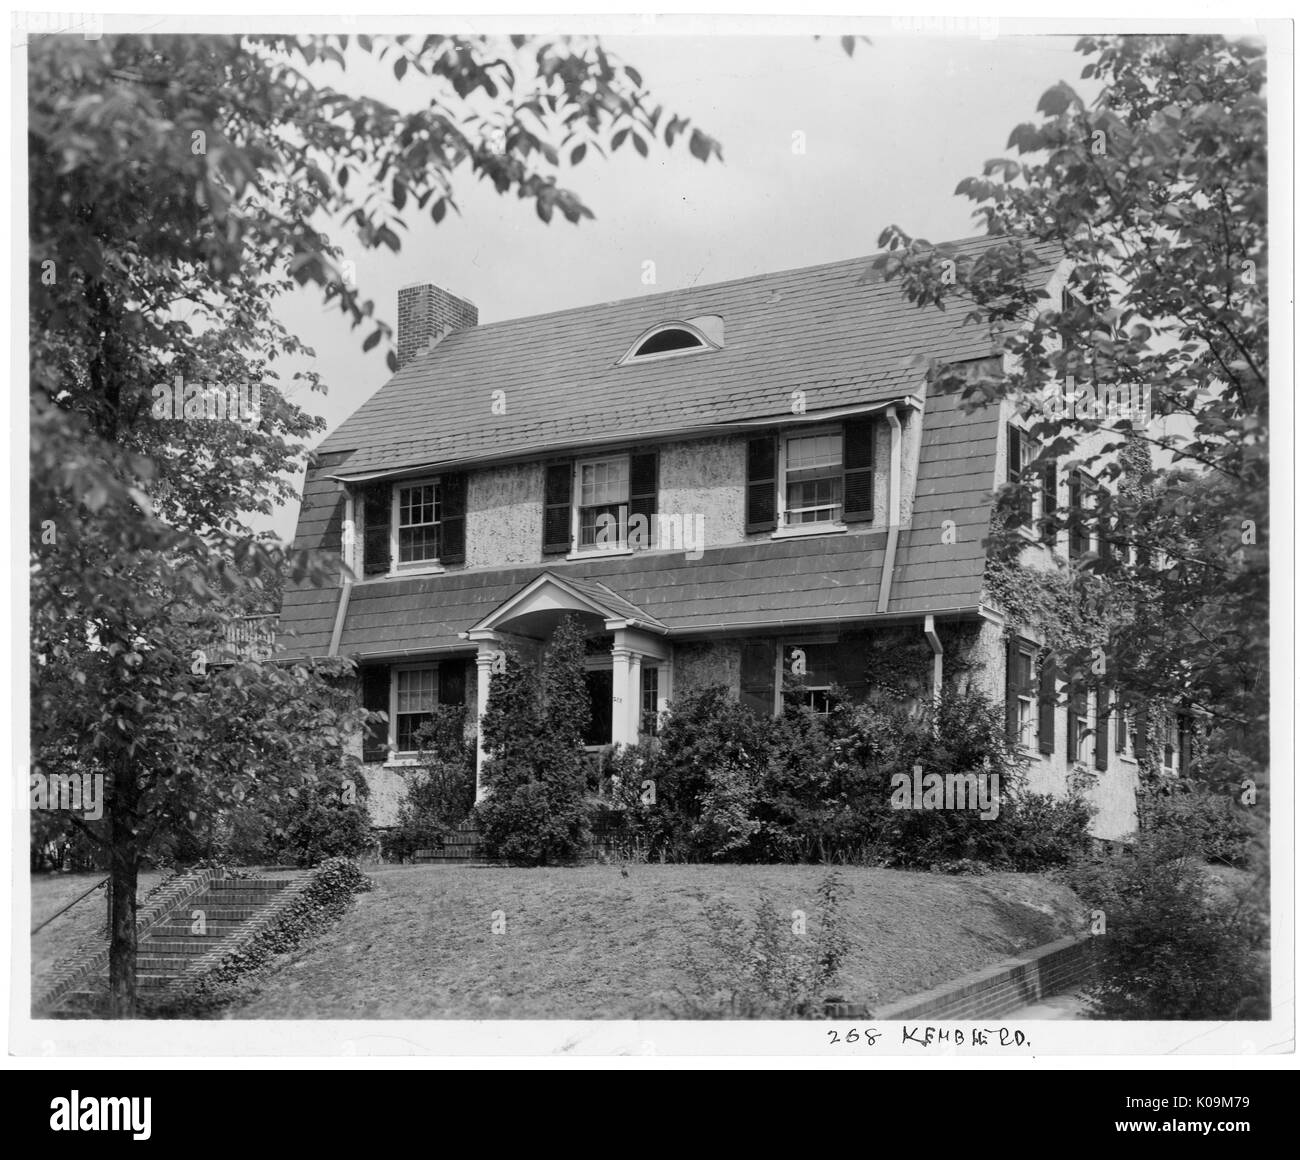 Landscape shot of a two-story house with steps leading to the front door, with a brick chimney, surrounded by shrubs and trees with leaves, Roland Park/Guilford, Baltimore, Maryland, 1910. This image is from a series documenting the construction and sale of homes in the Roland Park/Guilford neighborhood of Baltimore, a streetcar suburb and one of the first planned communities in the United States. The neighborhood was segregated, and is considered an early example of the enforcement of racial segregation through the use of restricted covenants. Stock Photo